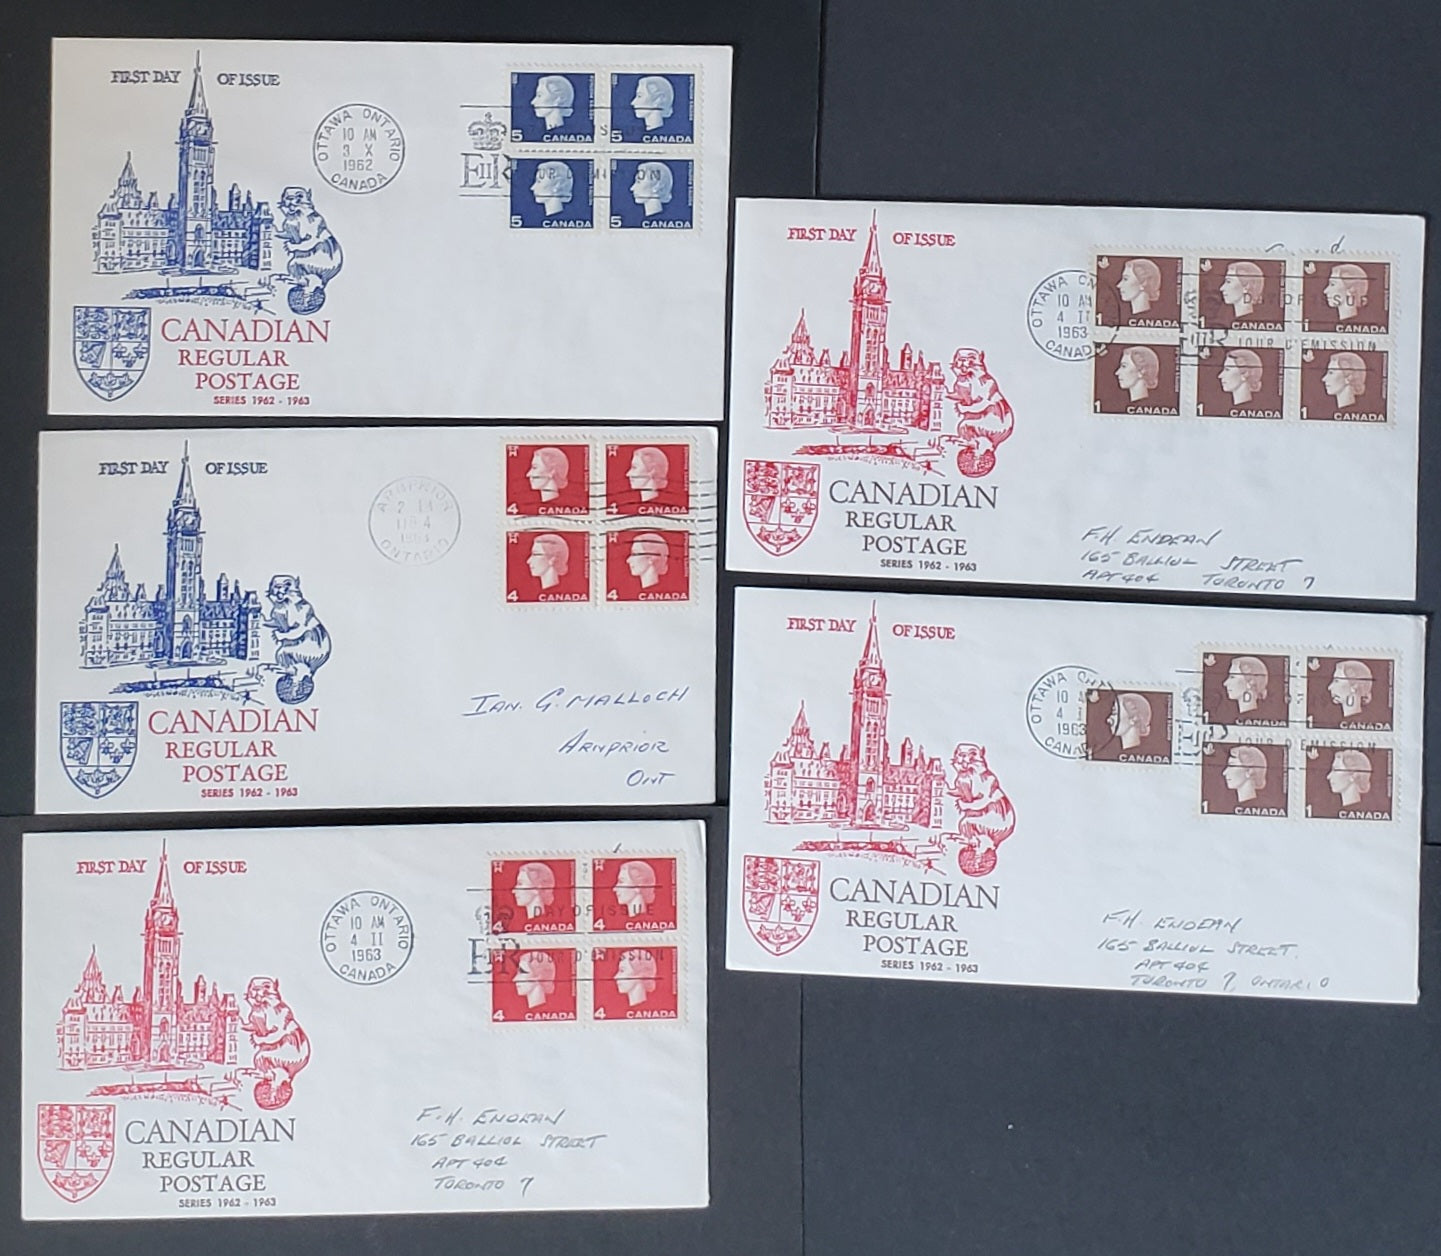 Lot 61 Canada #401,404,405 1c,4c,5c Brown, Carmine,Violet Blue  1962-1963 Queen Elizabeth II - Cameo Issue, 5 Robbins First Day Covers Franked With Singles And Blocks, A & B Cachets,  Most Addressed In Pencil Or Unaddressed. Cat. Value $25